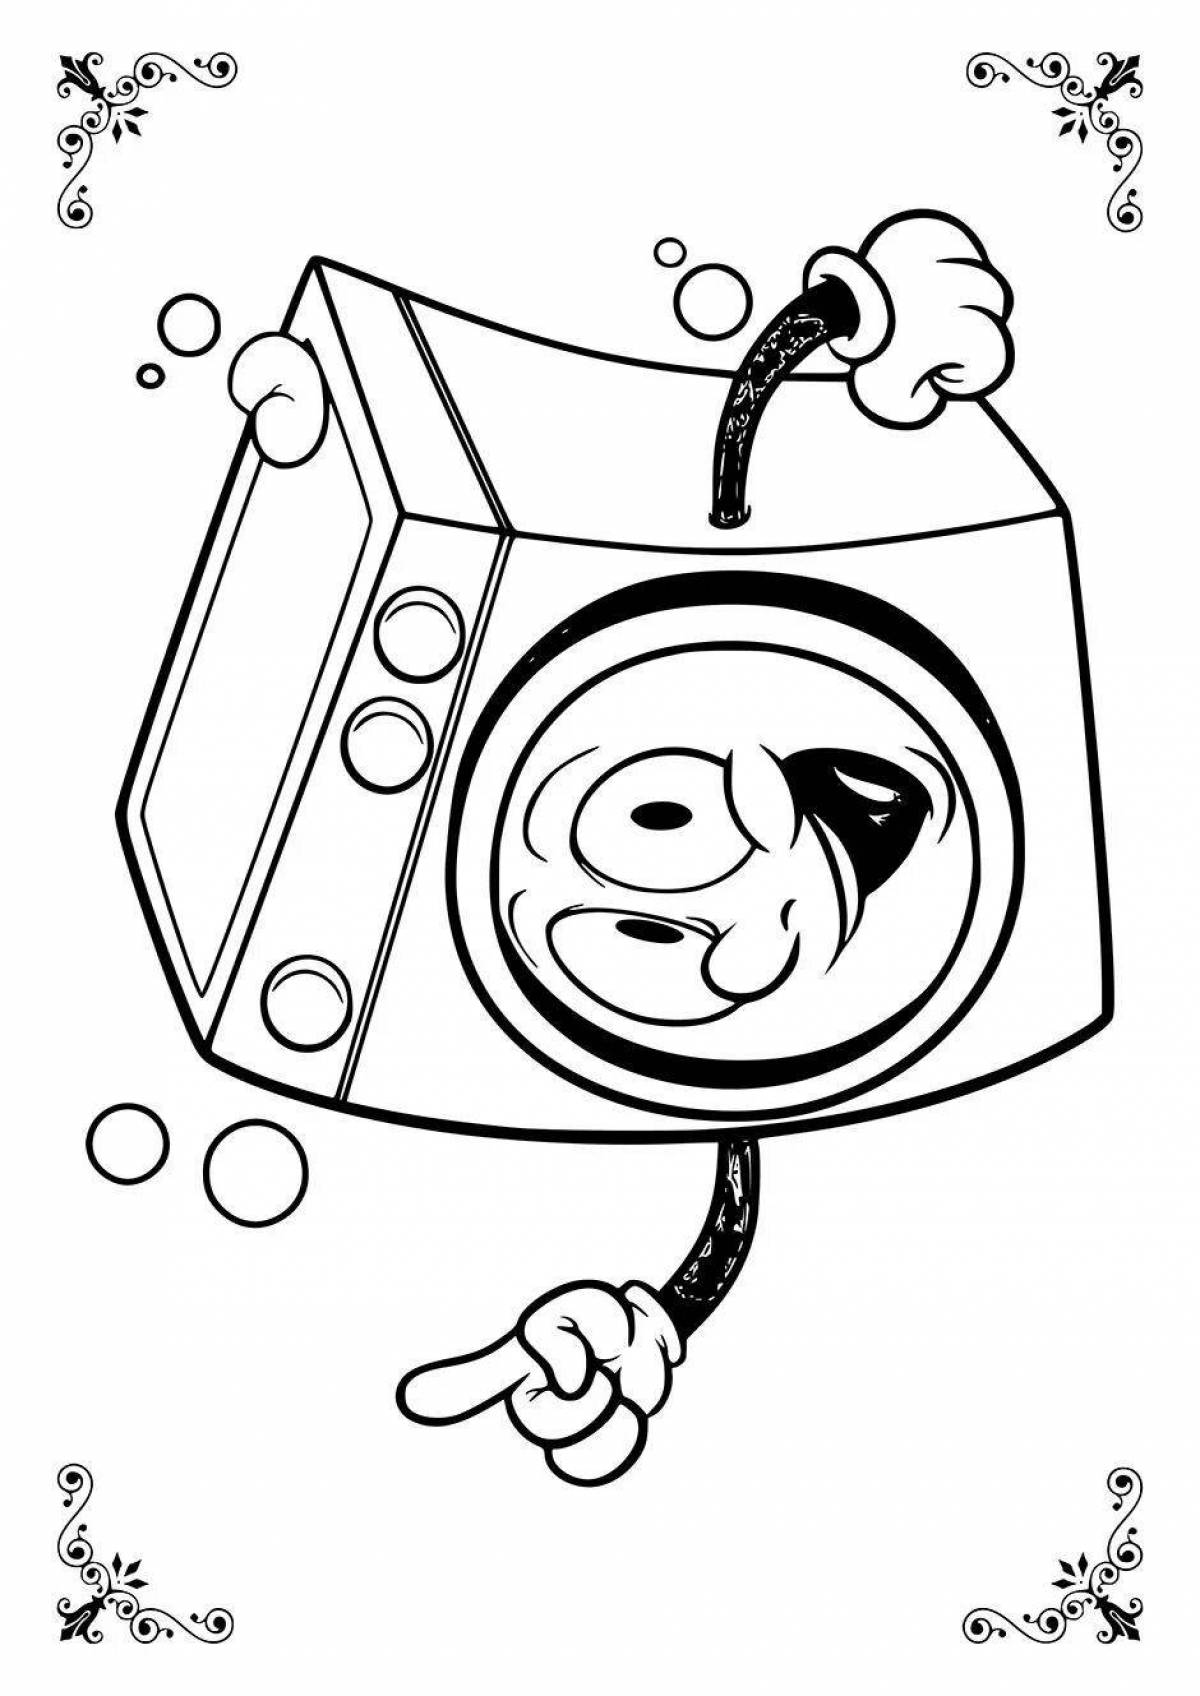 Colorful washing machine coloring page for kids